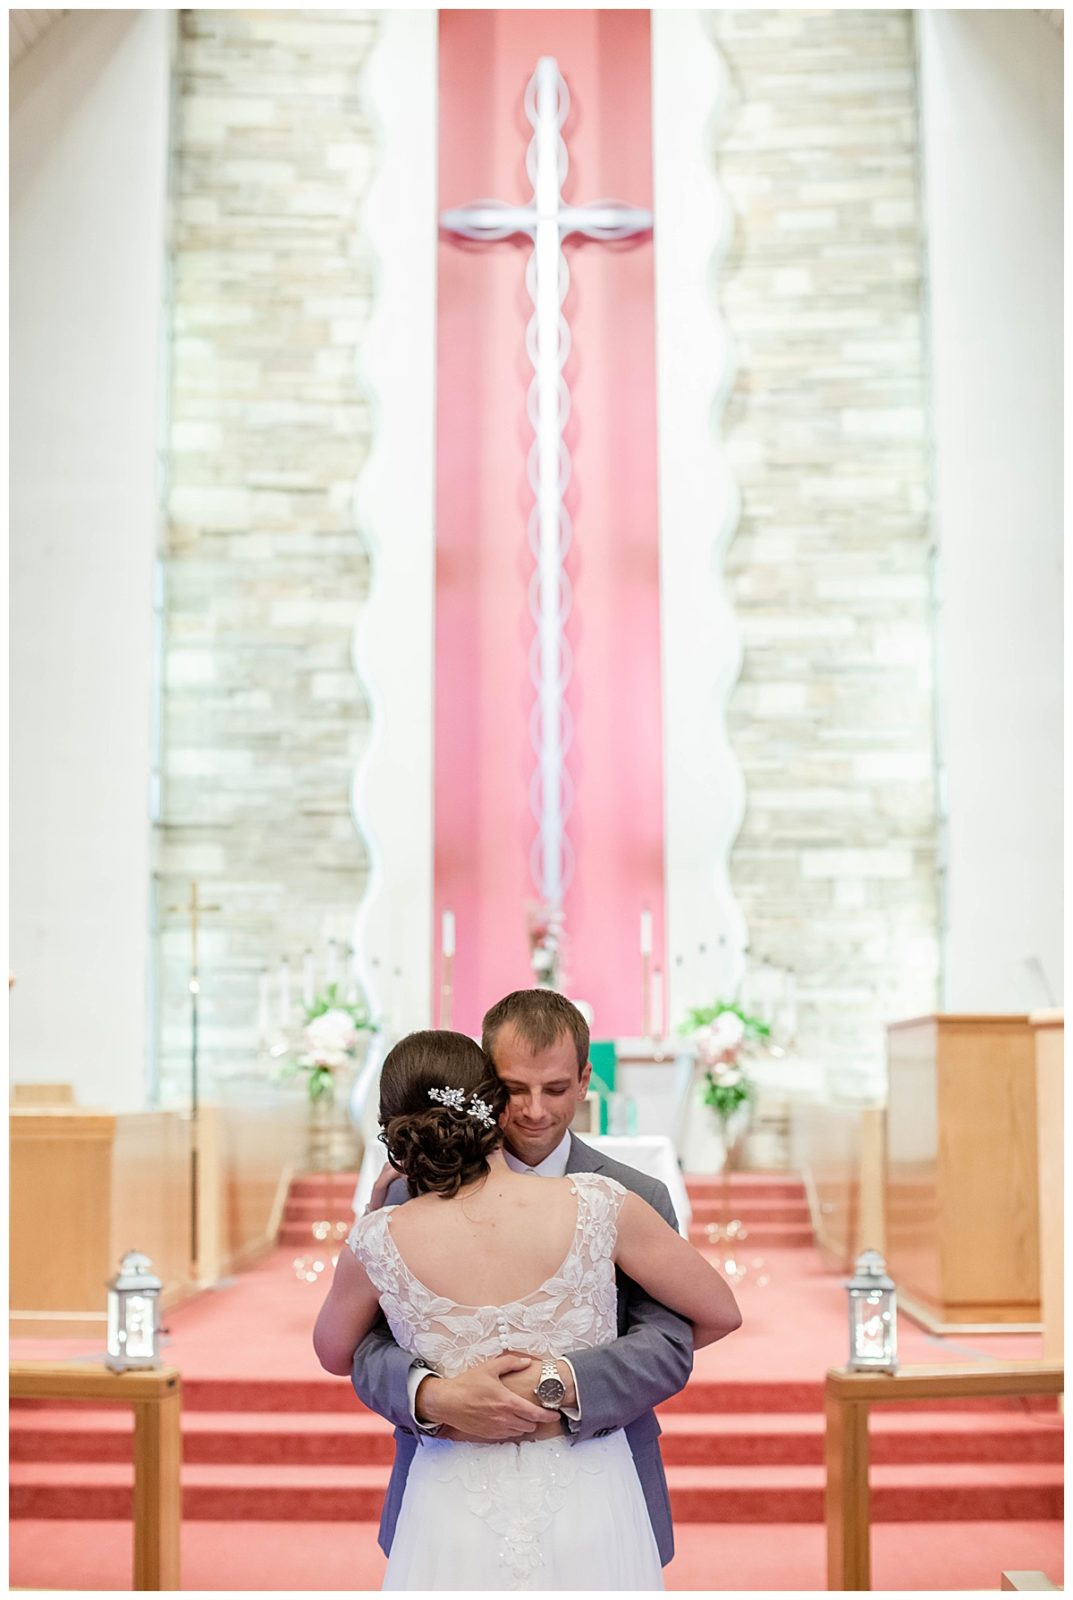 Bride and Groom First Look | Fort Dodge Wedding shot by Jessica Brees Photo & Video